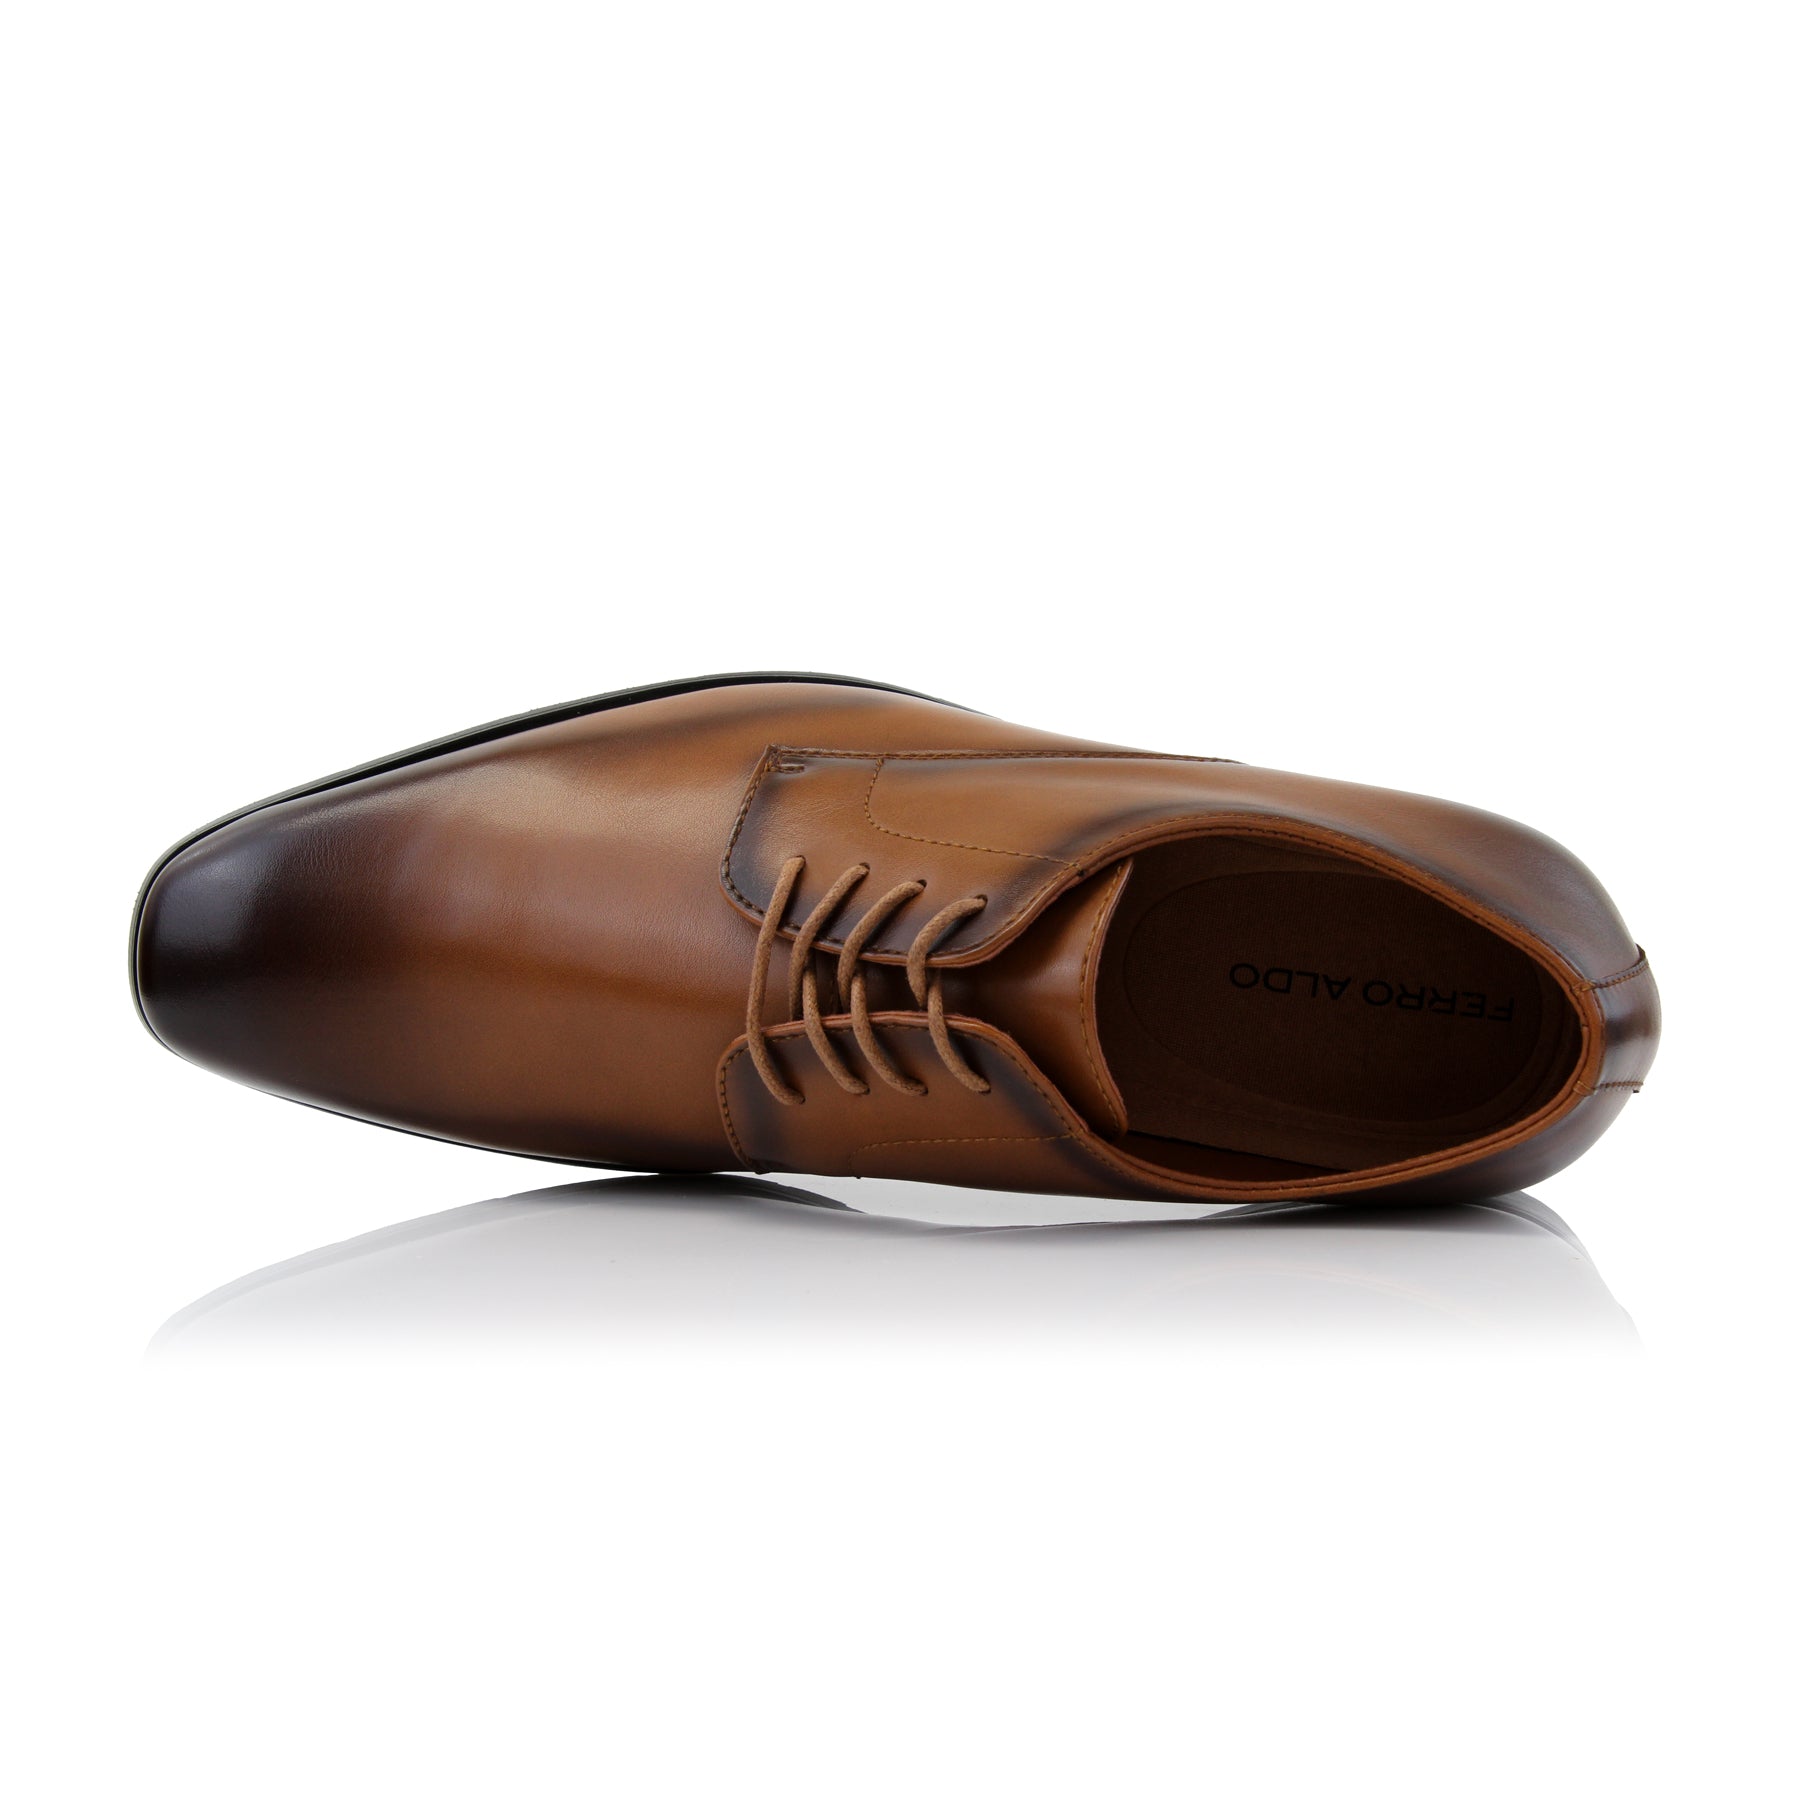 Burnished Plain Toe Derby Shoes | Alvin by Ferro Aldo | Conal Footwear | Top-Down Angle View